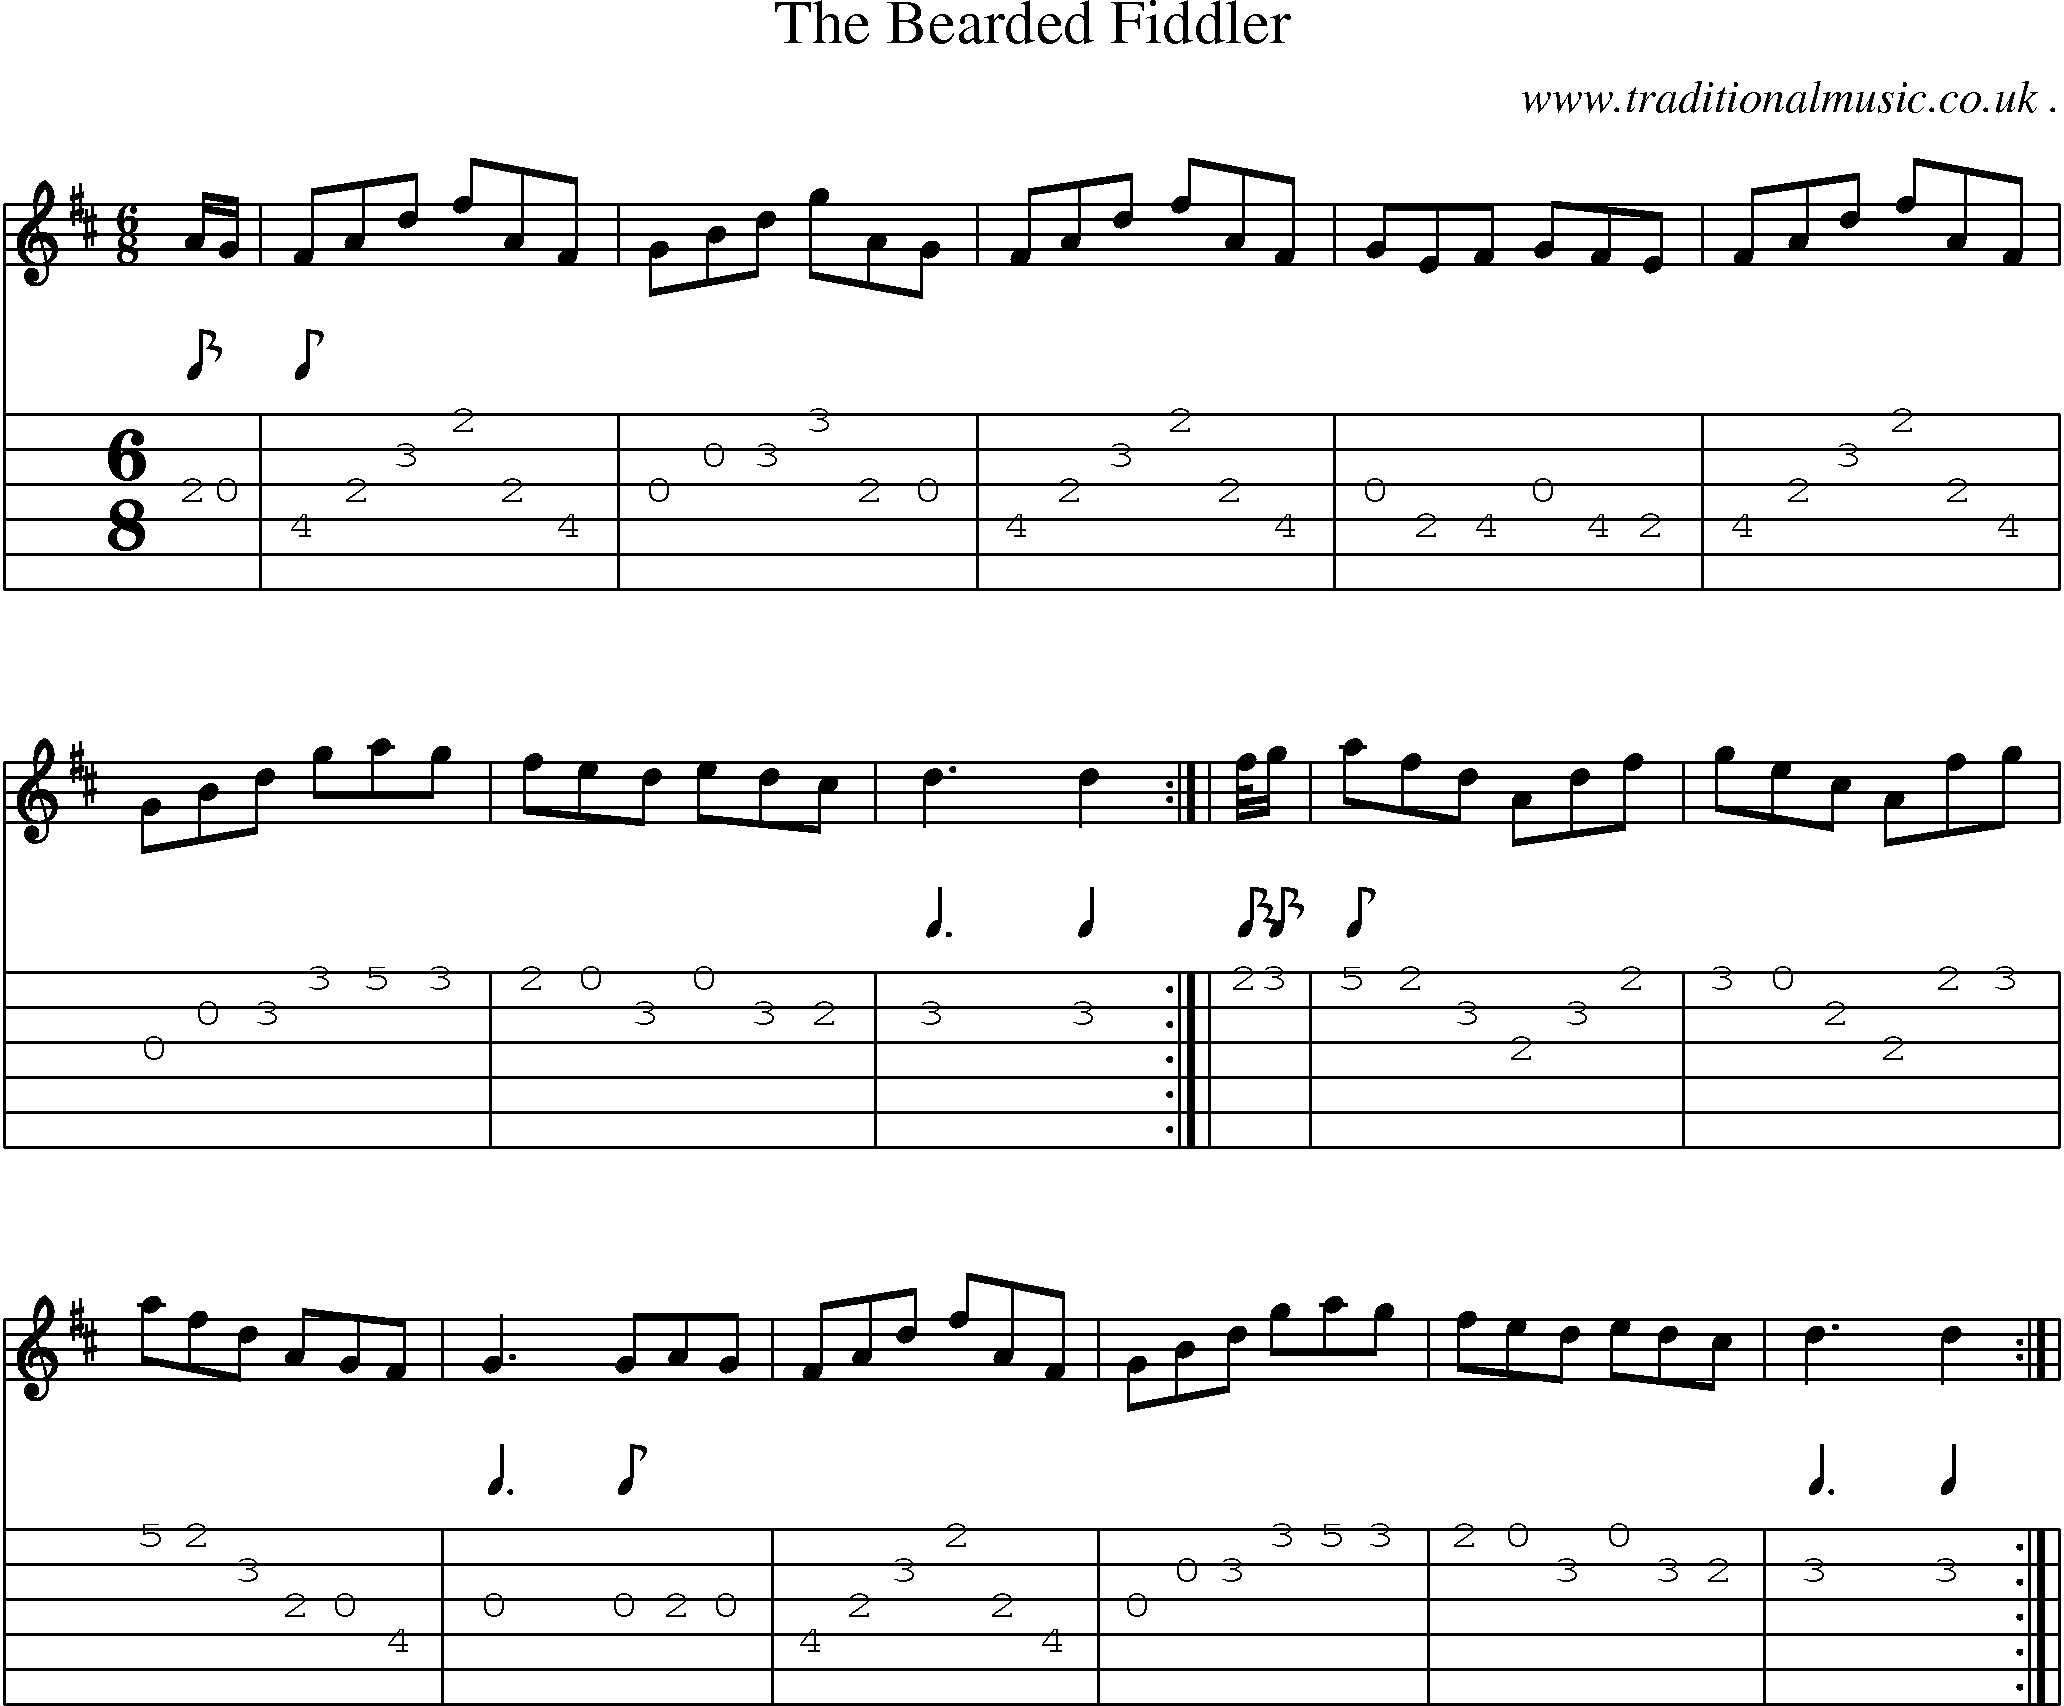 Sheet-Music and Guitar Tabs for The Bearded Fiddler